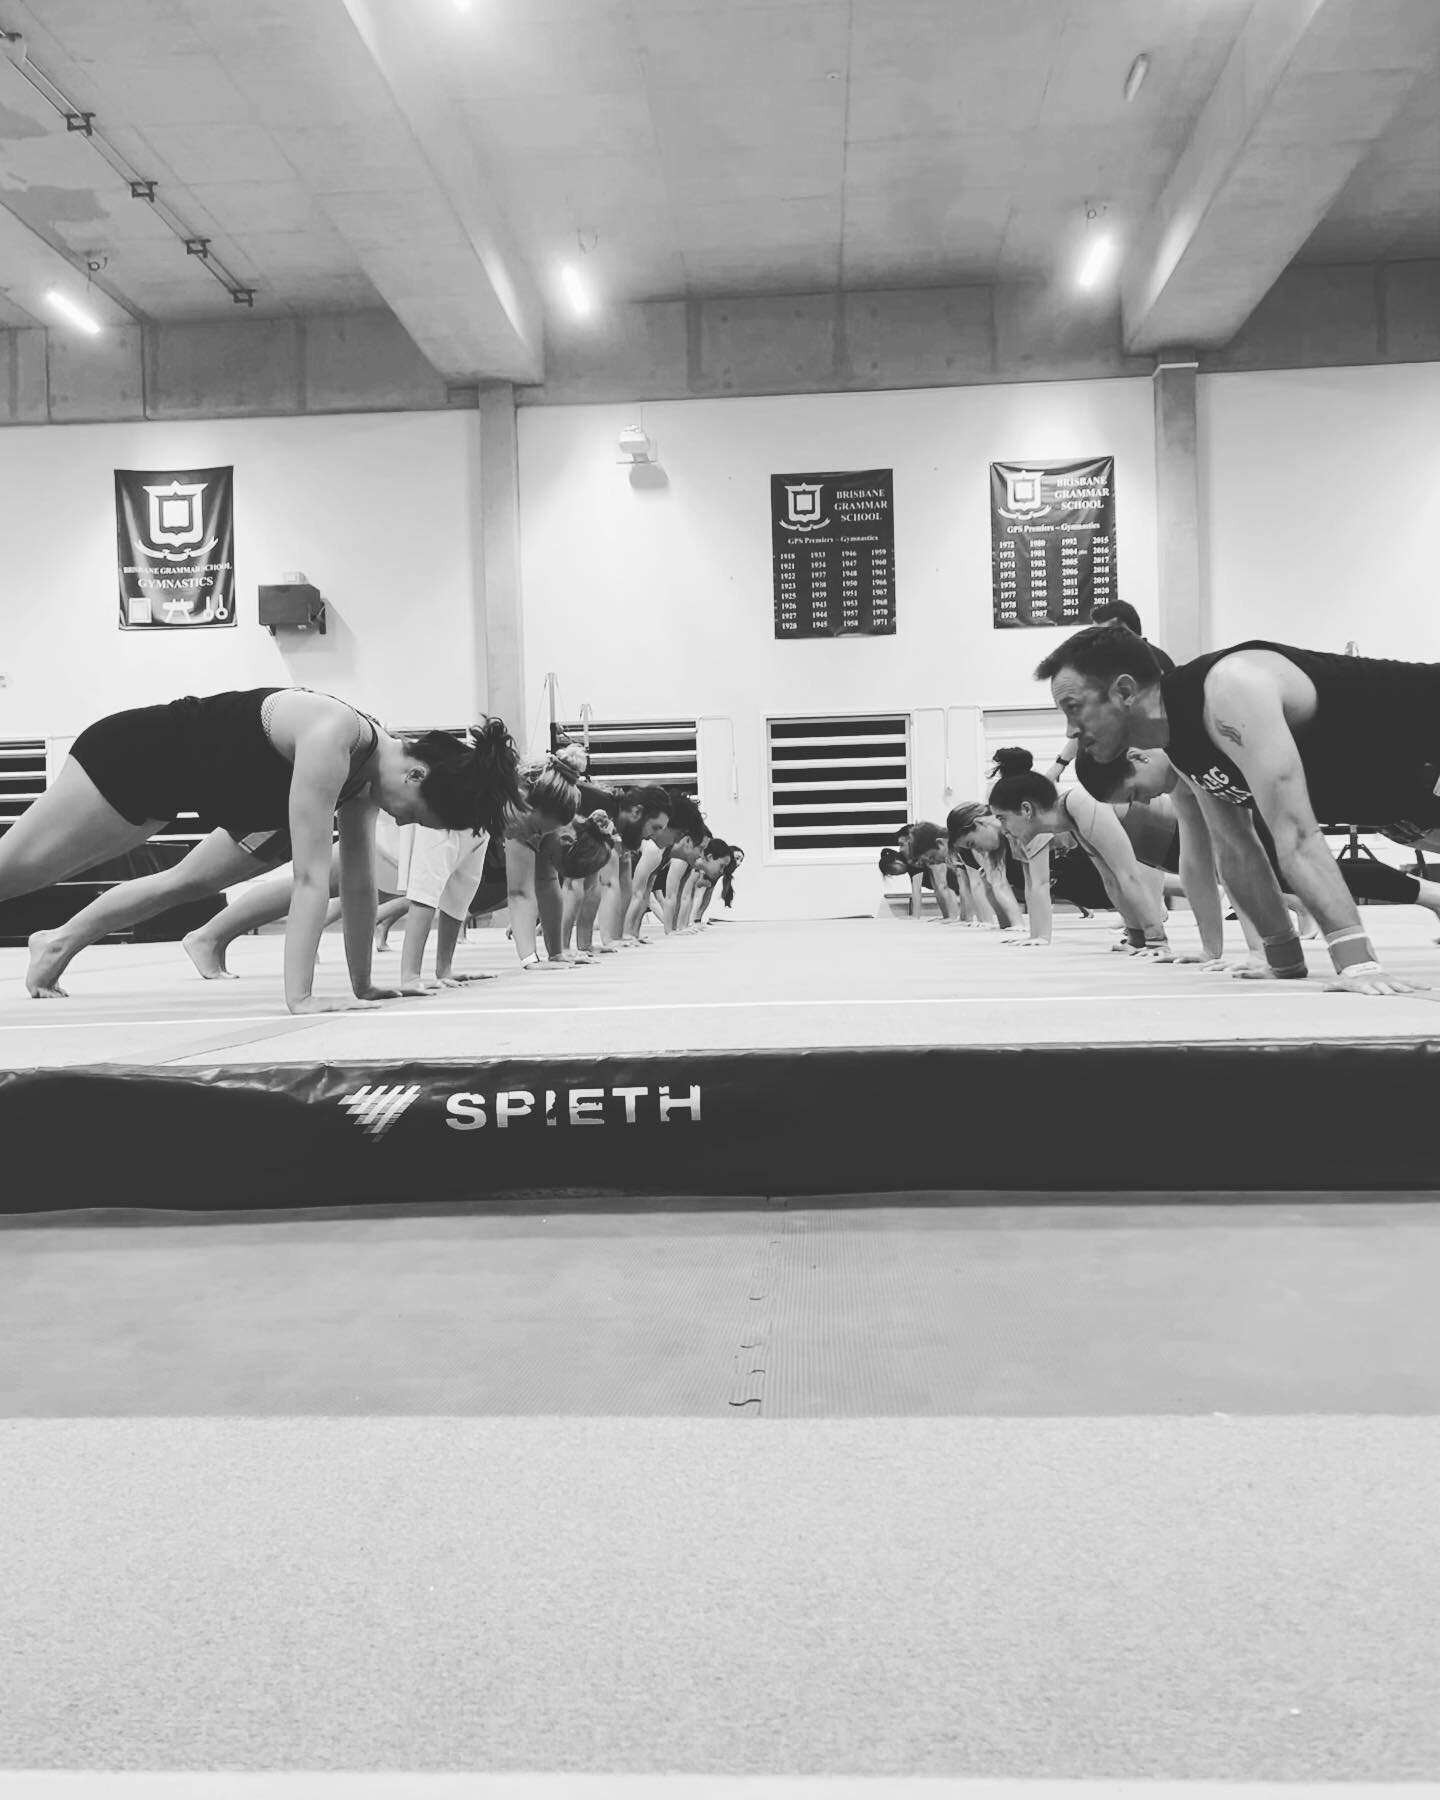 Line 'em up! 
What better way to get your plank on and work that core than in with 30 of your mates 😎

#powerinnumbers #adultgymnastics #urbangymnastics #tumbling #strengthandconditioning